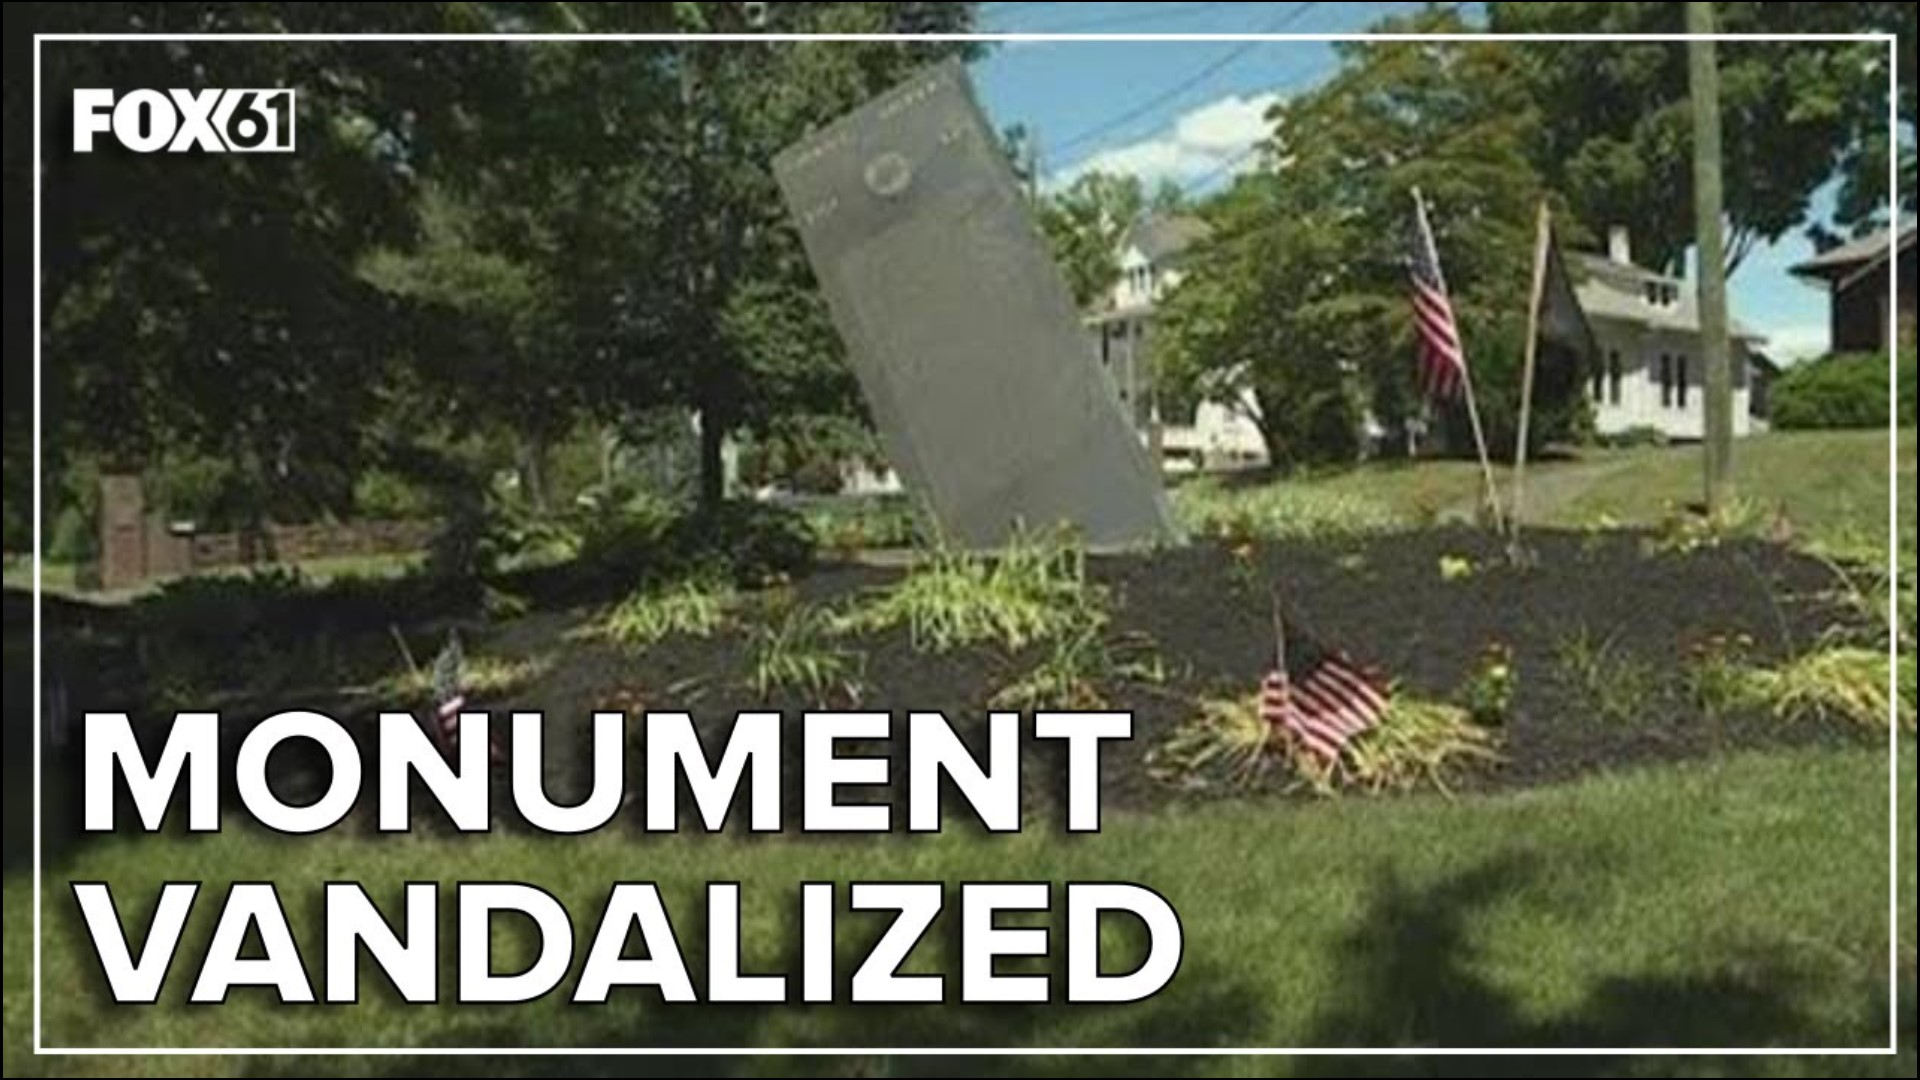 A swastika was spray-painted on the monument most recently.